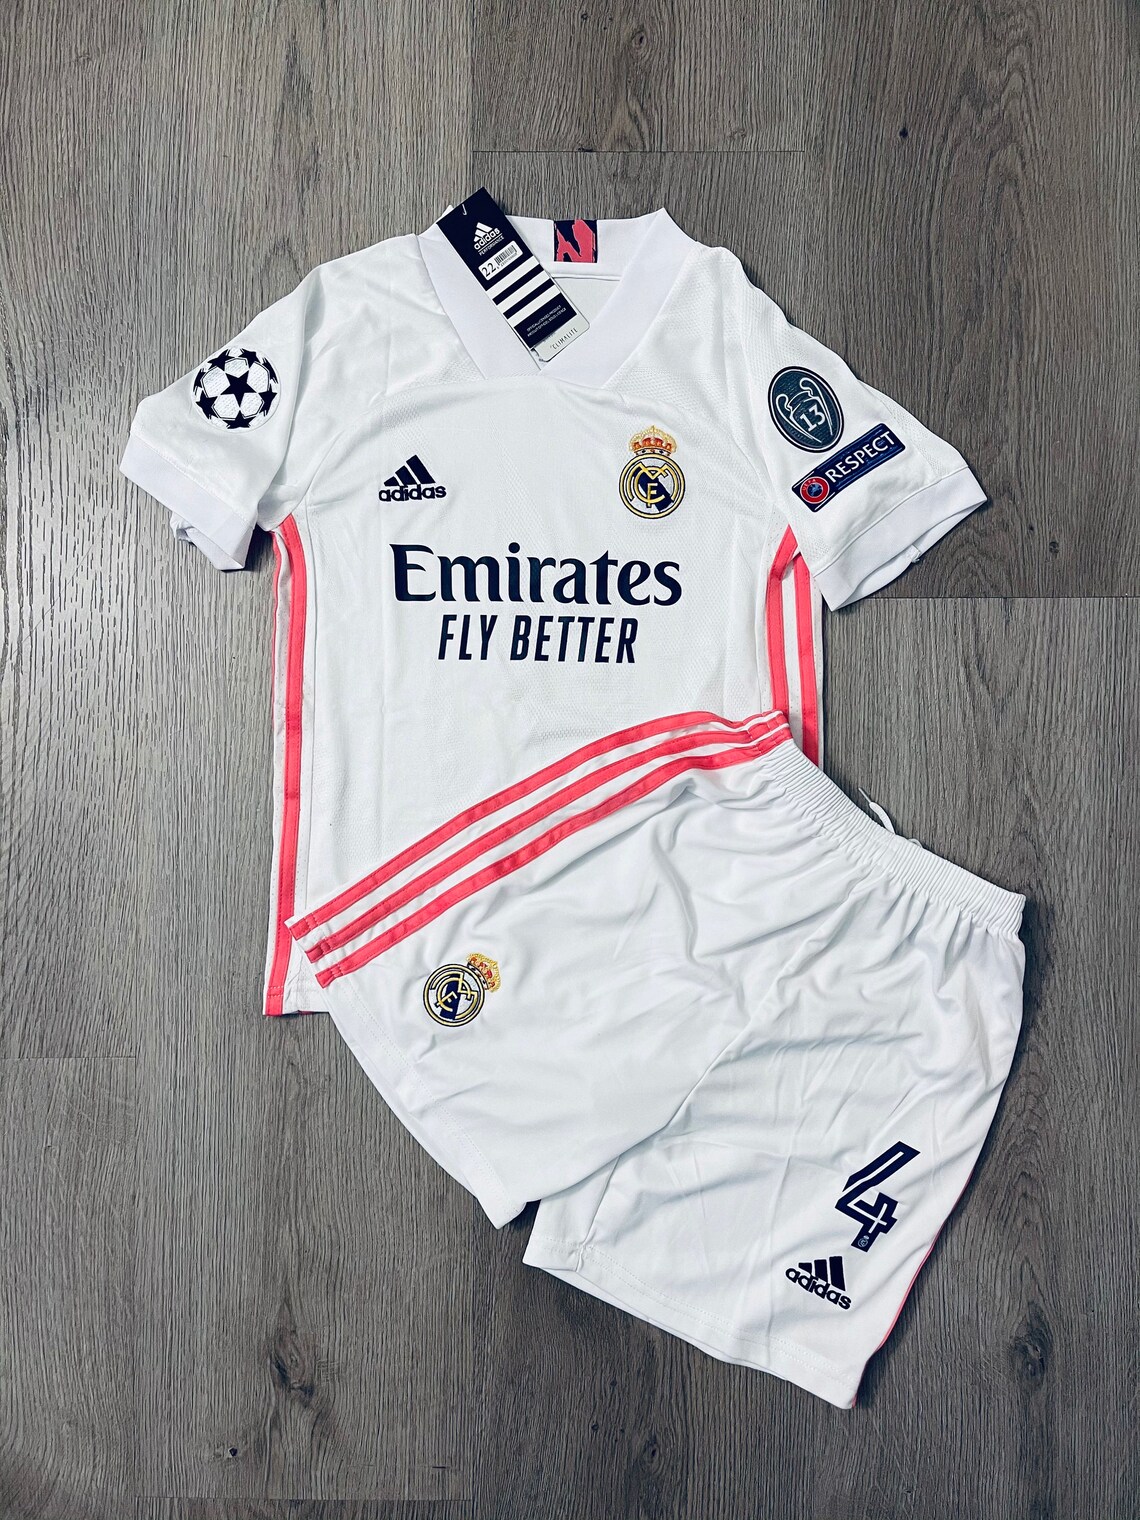 Sergio Ramos 4 Real Madrid Home 20/21 soccer kit for kids | Etsy